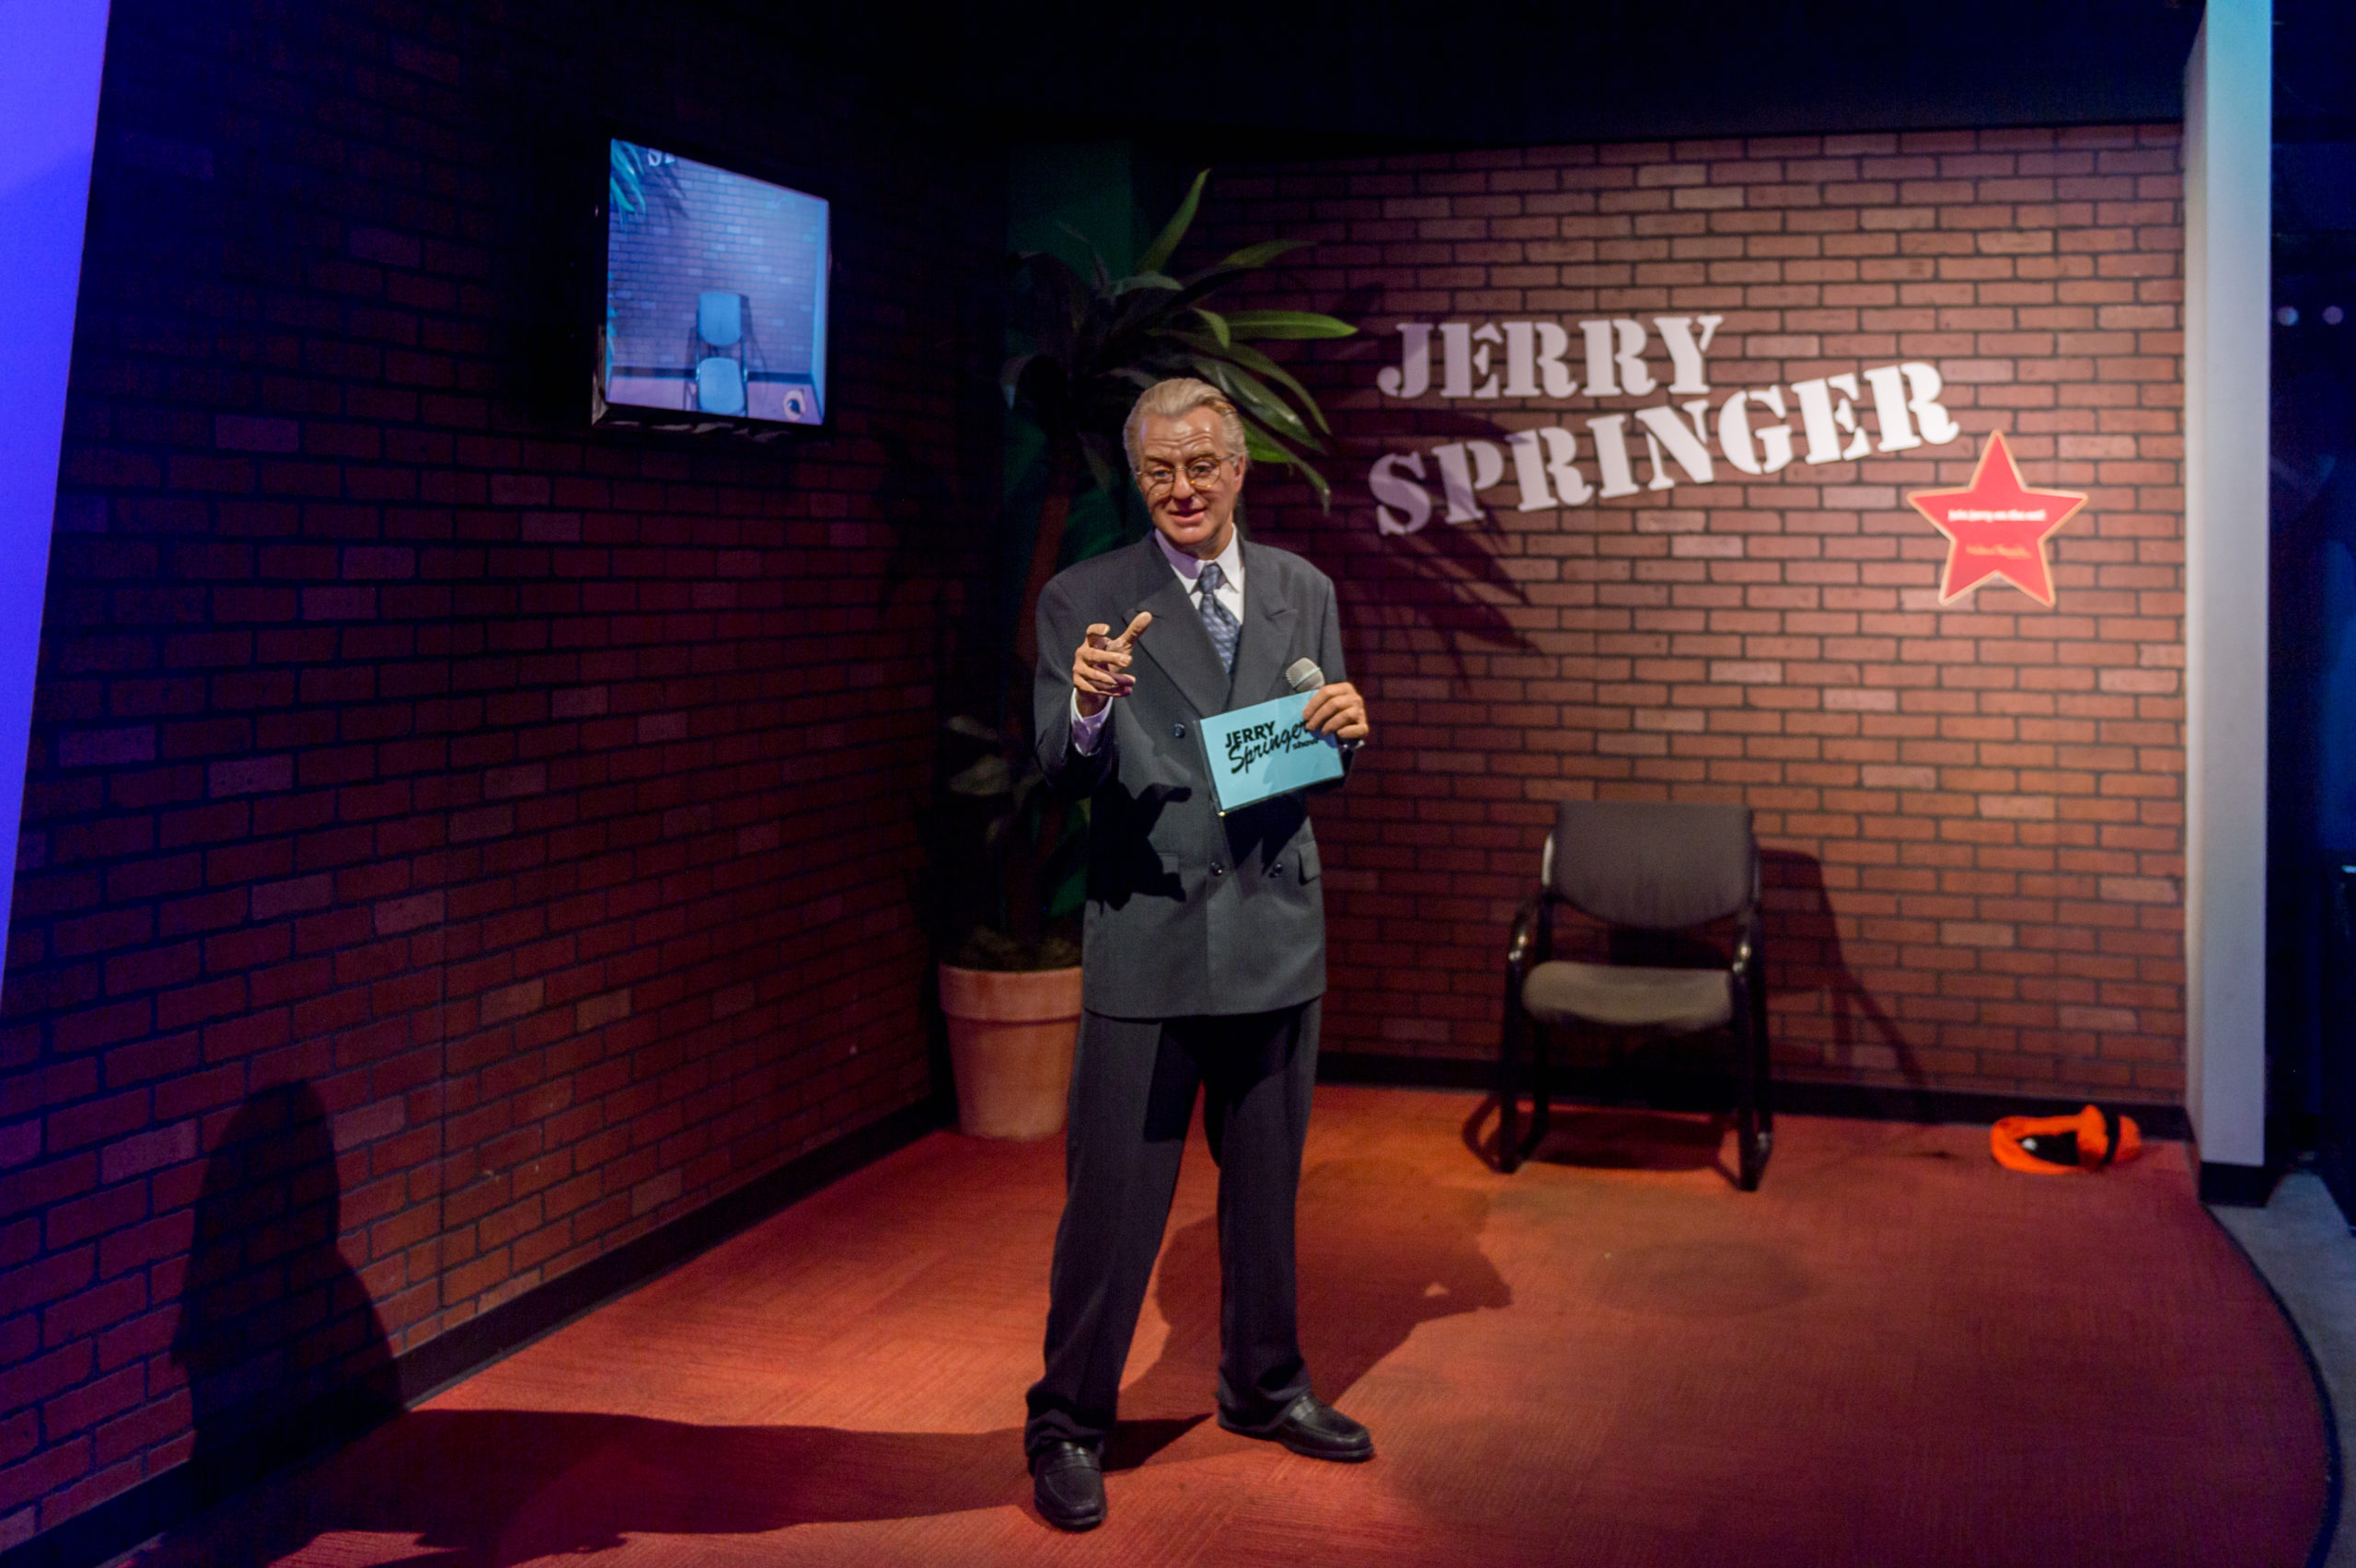 Jerry Springer Audience Member Arrested for Stamford 53a-181 Breach of Peace